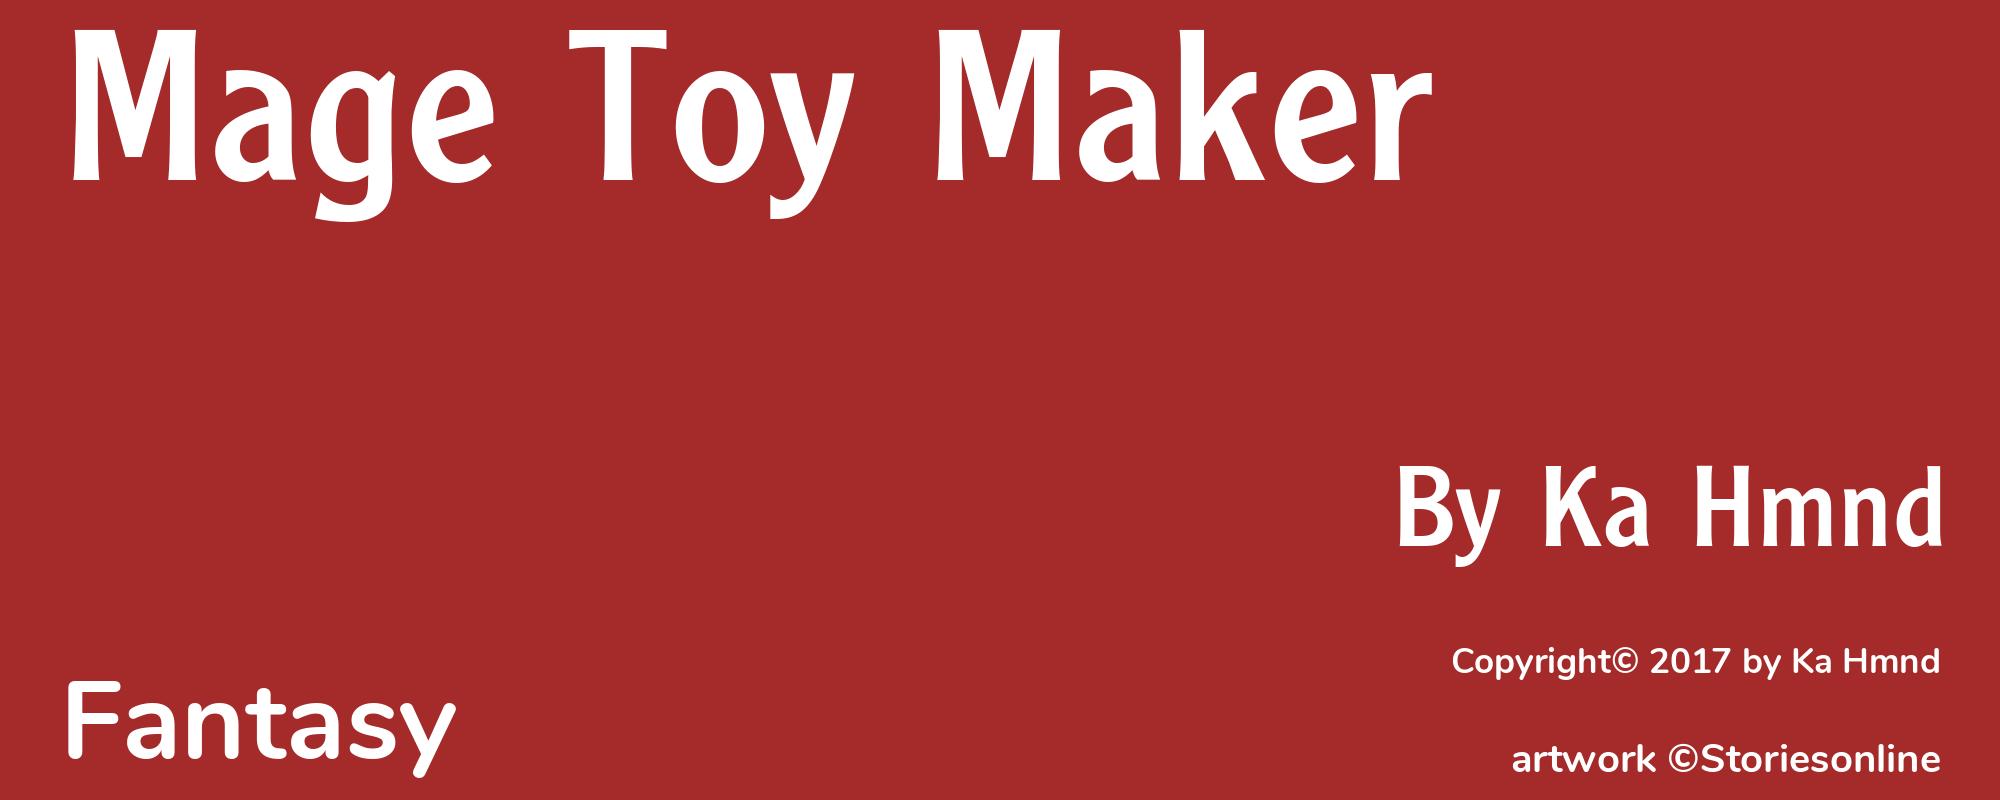 Mage Toy Maker - Cover